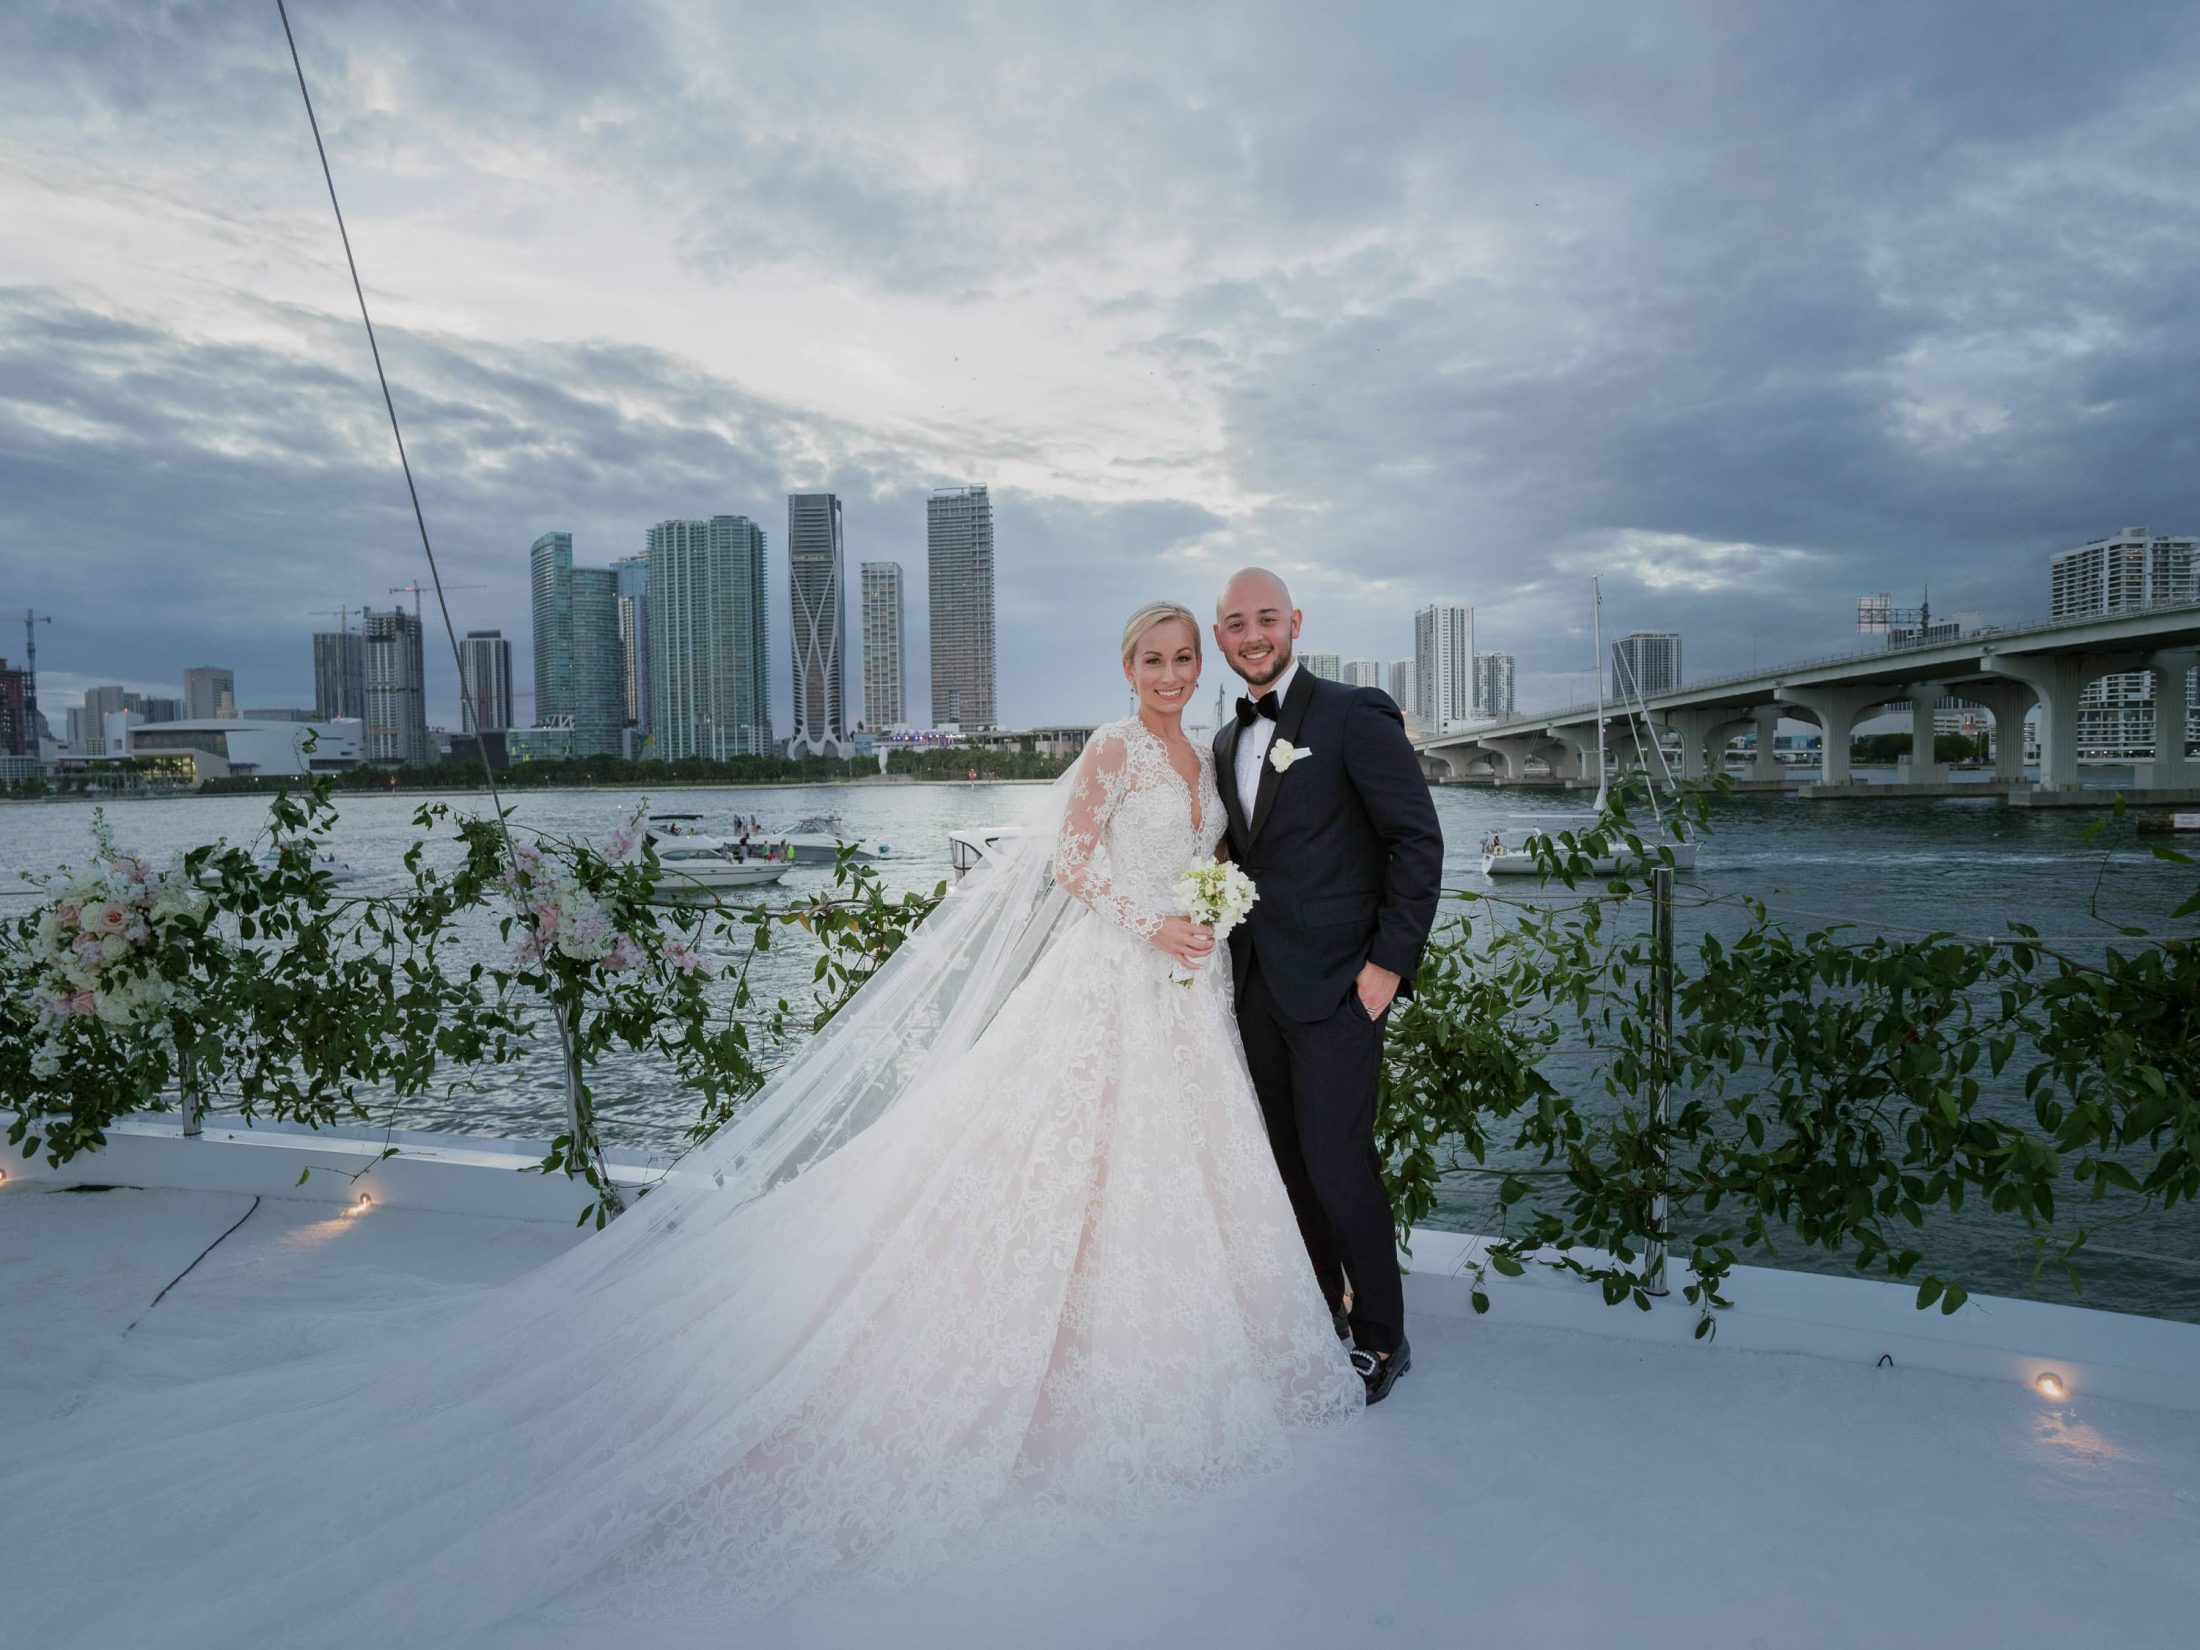 Bride and groom on the upper deck at this Miami yacht wedding | Photo by Corbin Gurkin